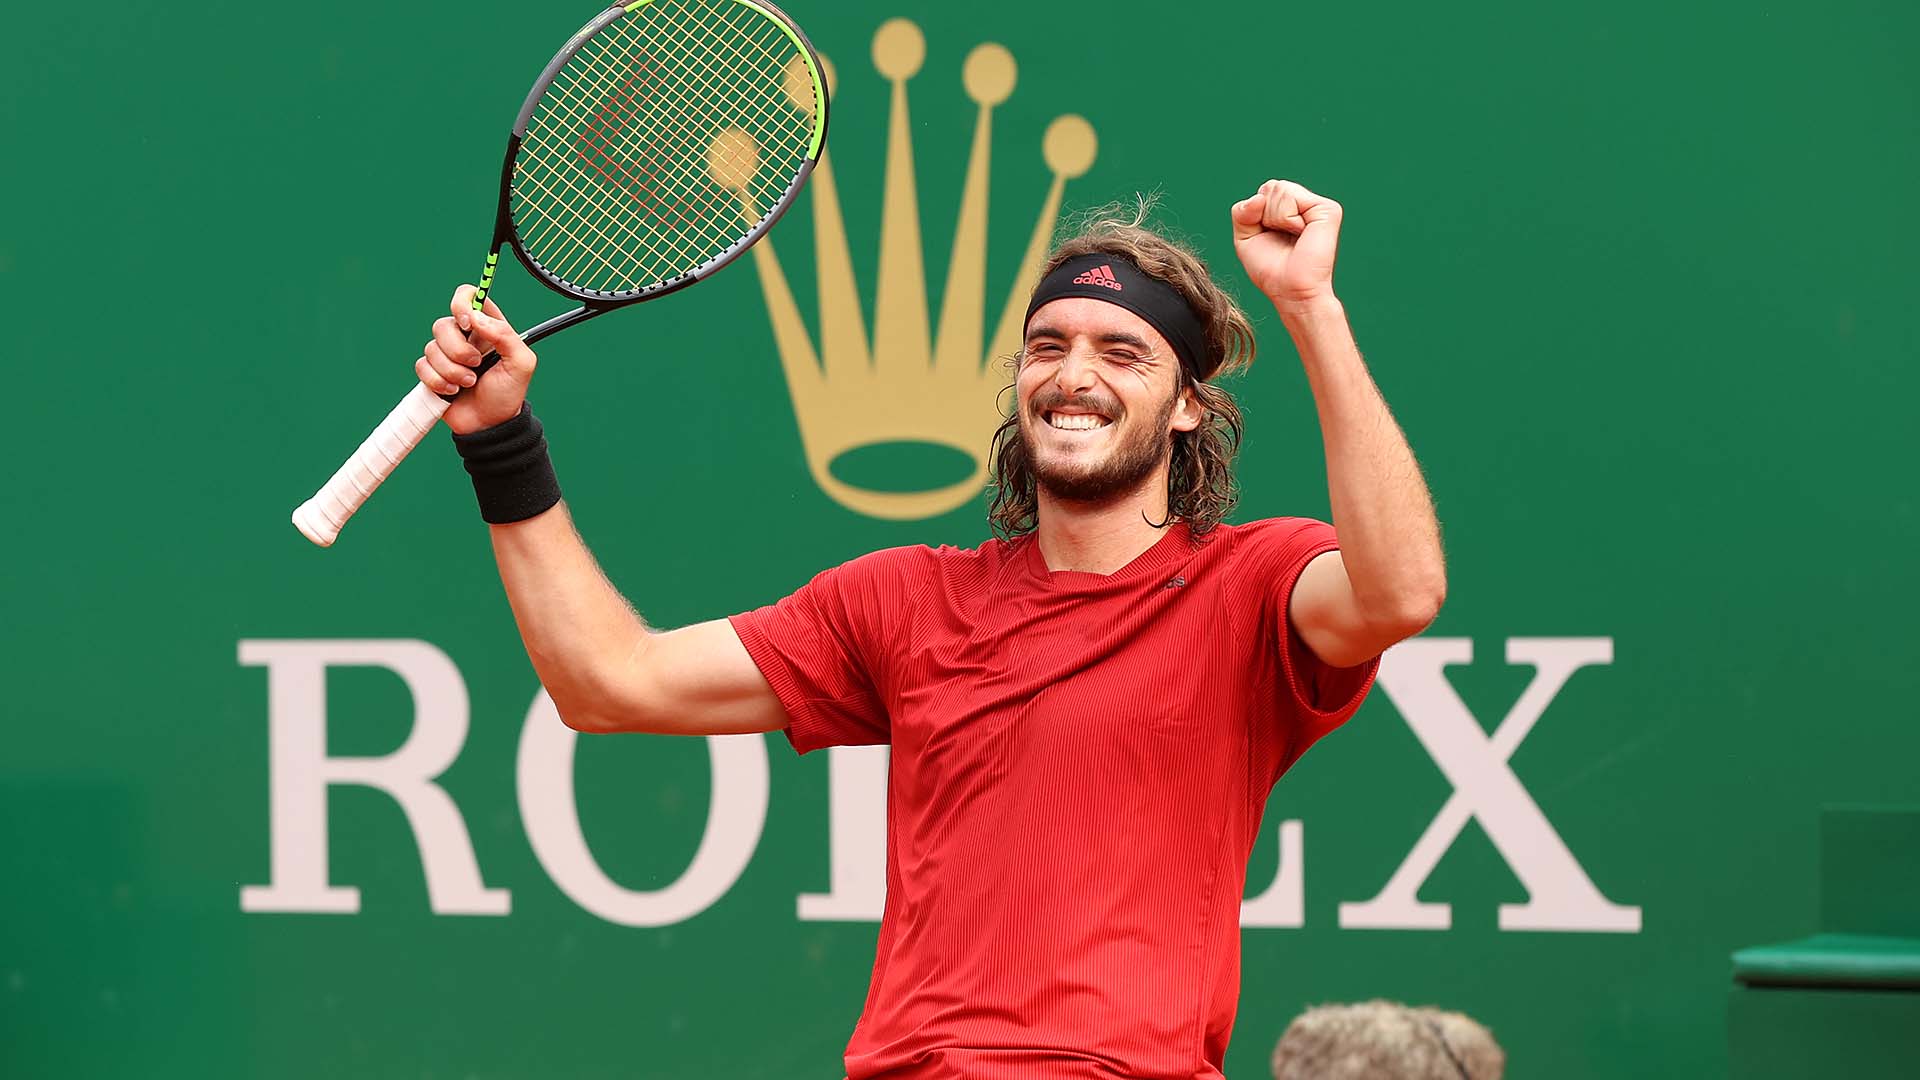 Top highlights from the Monte-Carlo Rolex Masters 2021